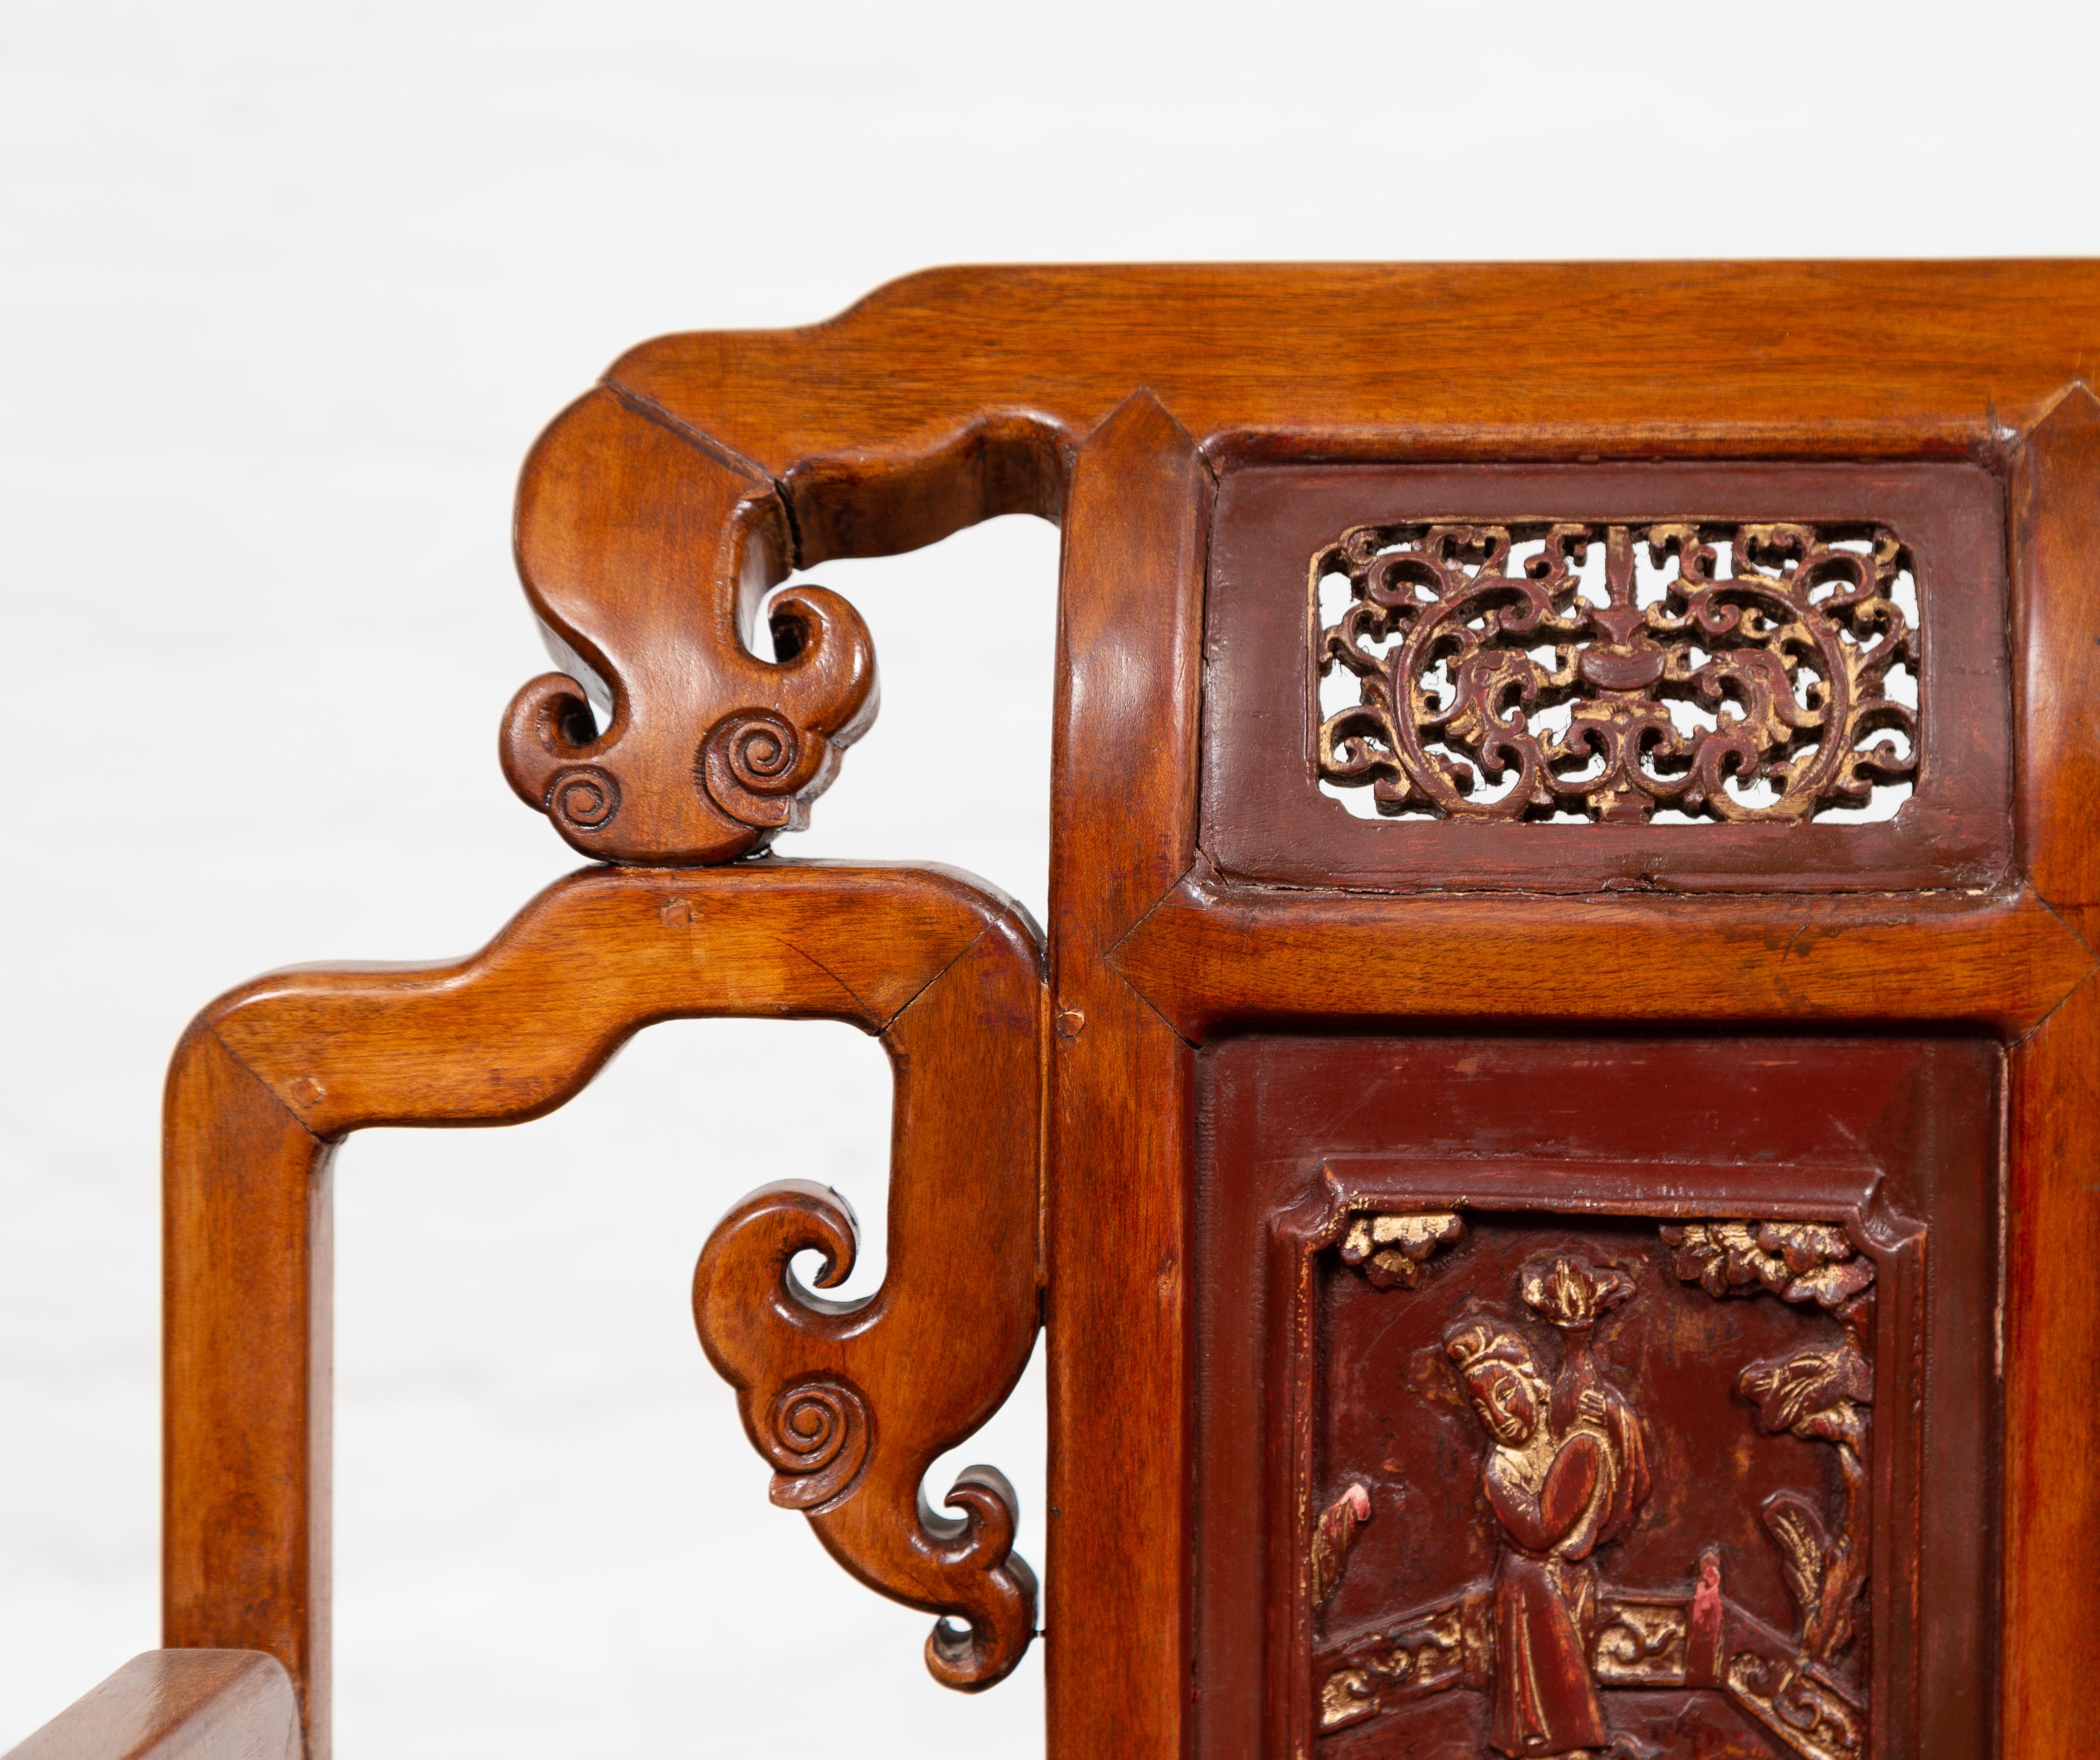 Hand-Carved Hand Carved Antique Chinese Chair with Natural Wood Patina and Scroll Décor